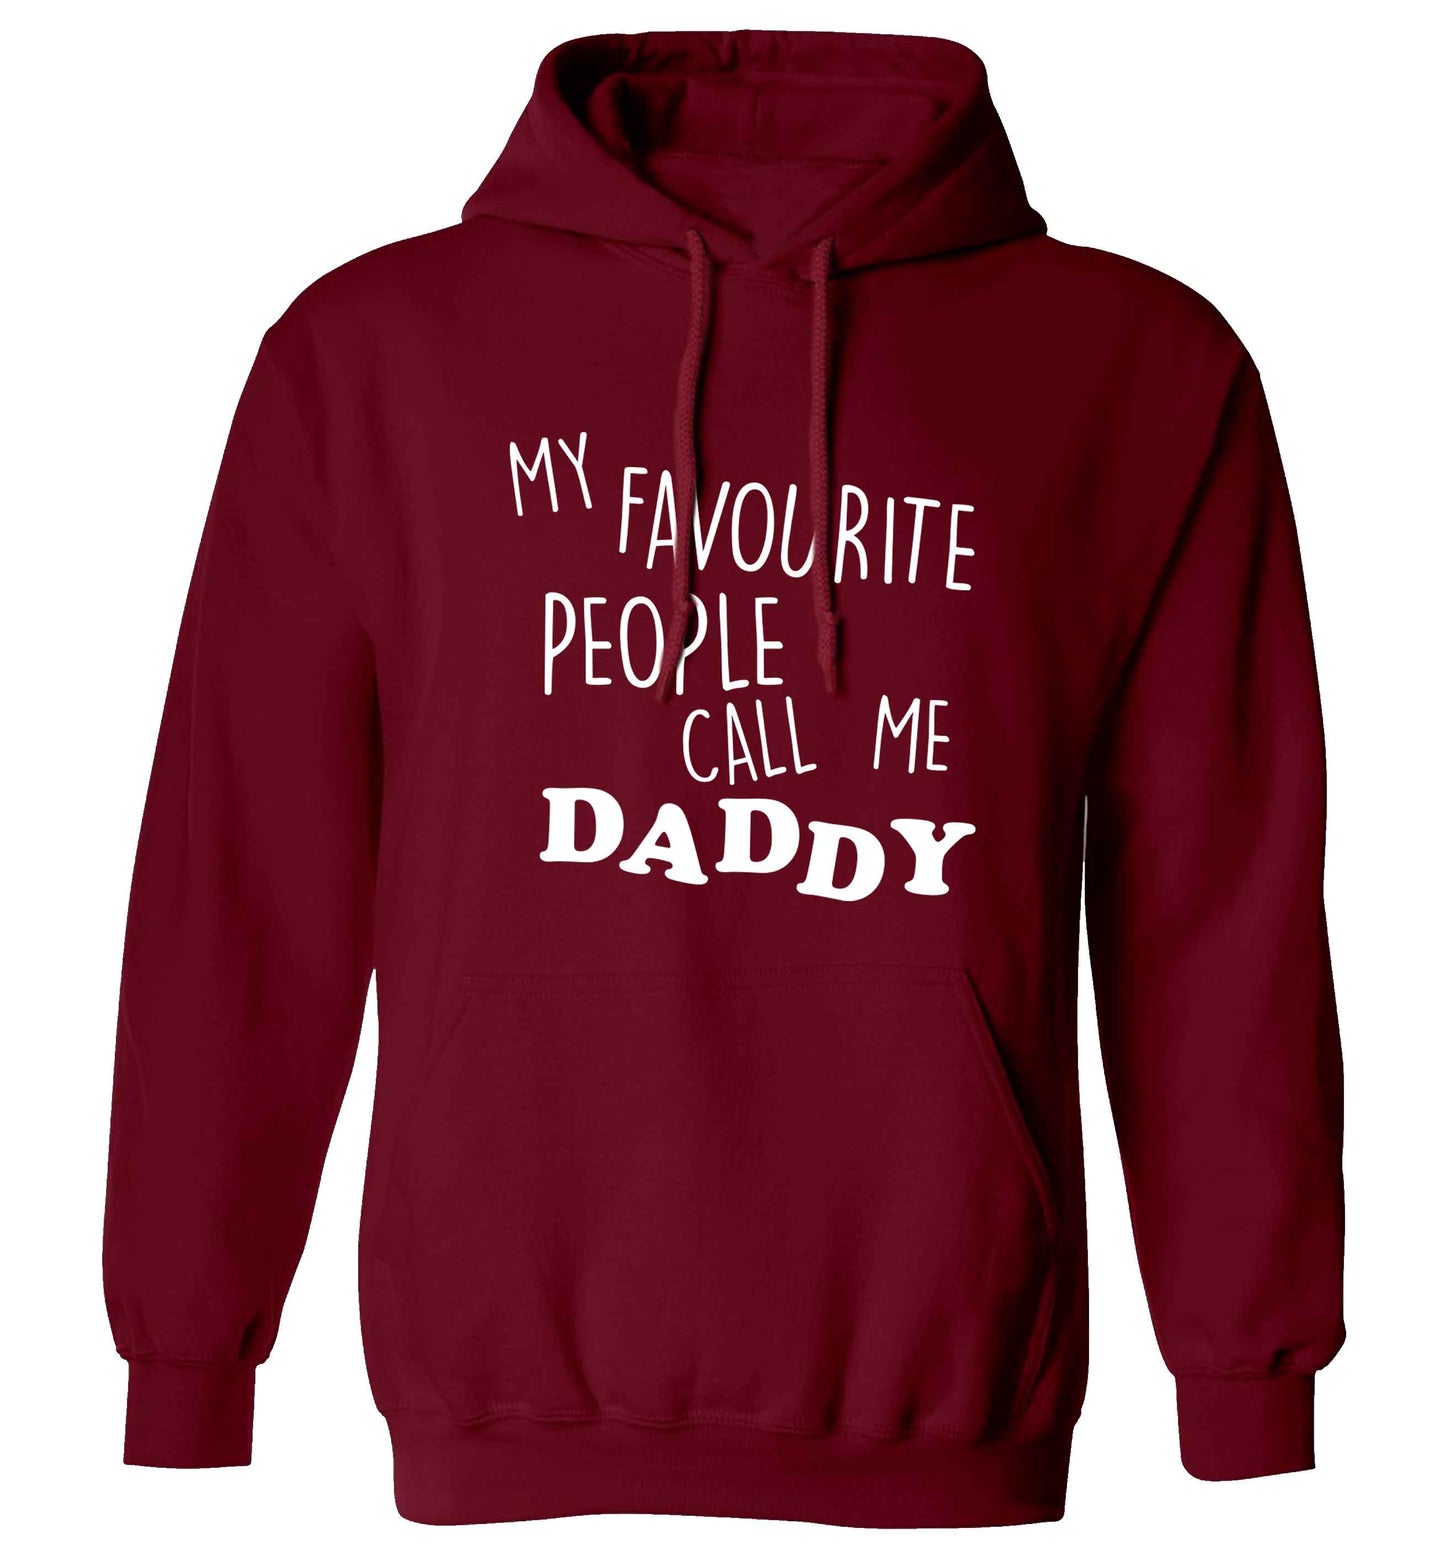 My favourite people call me daddy adults unisex maroon hoodie 2XL